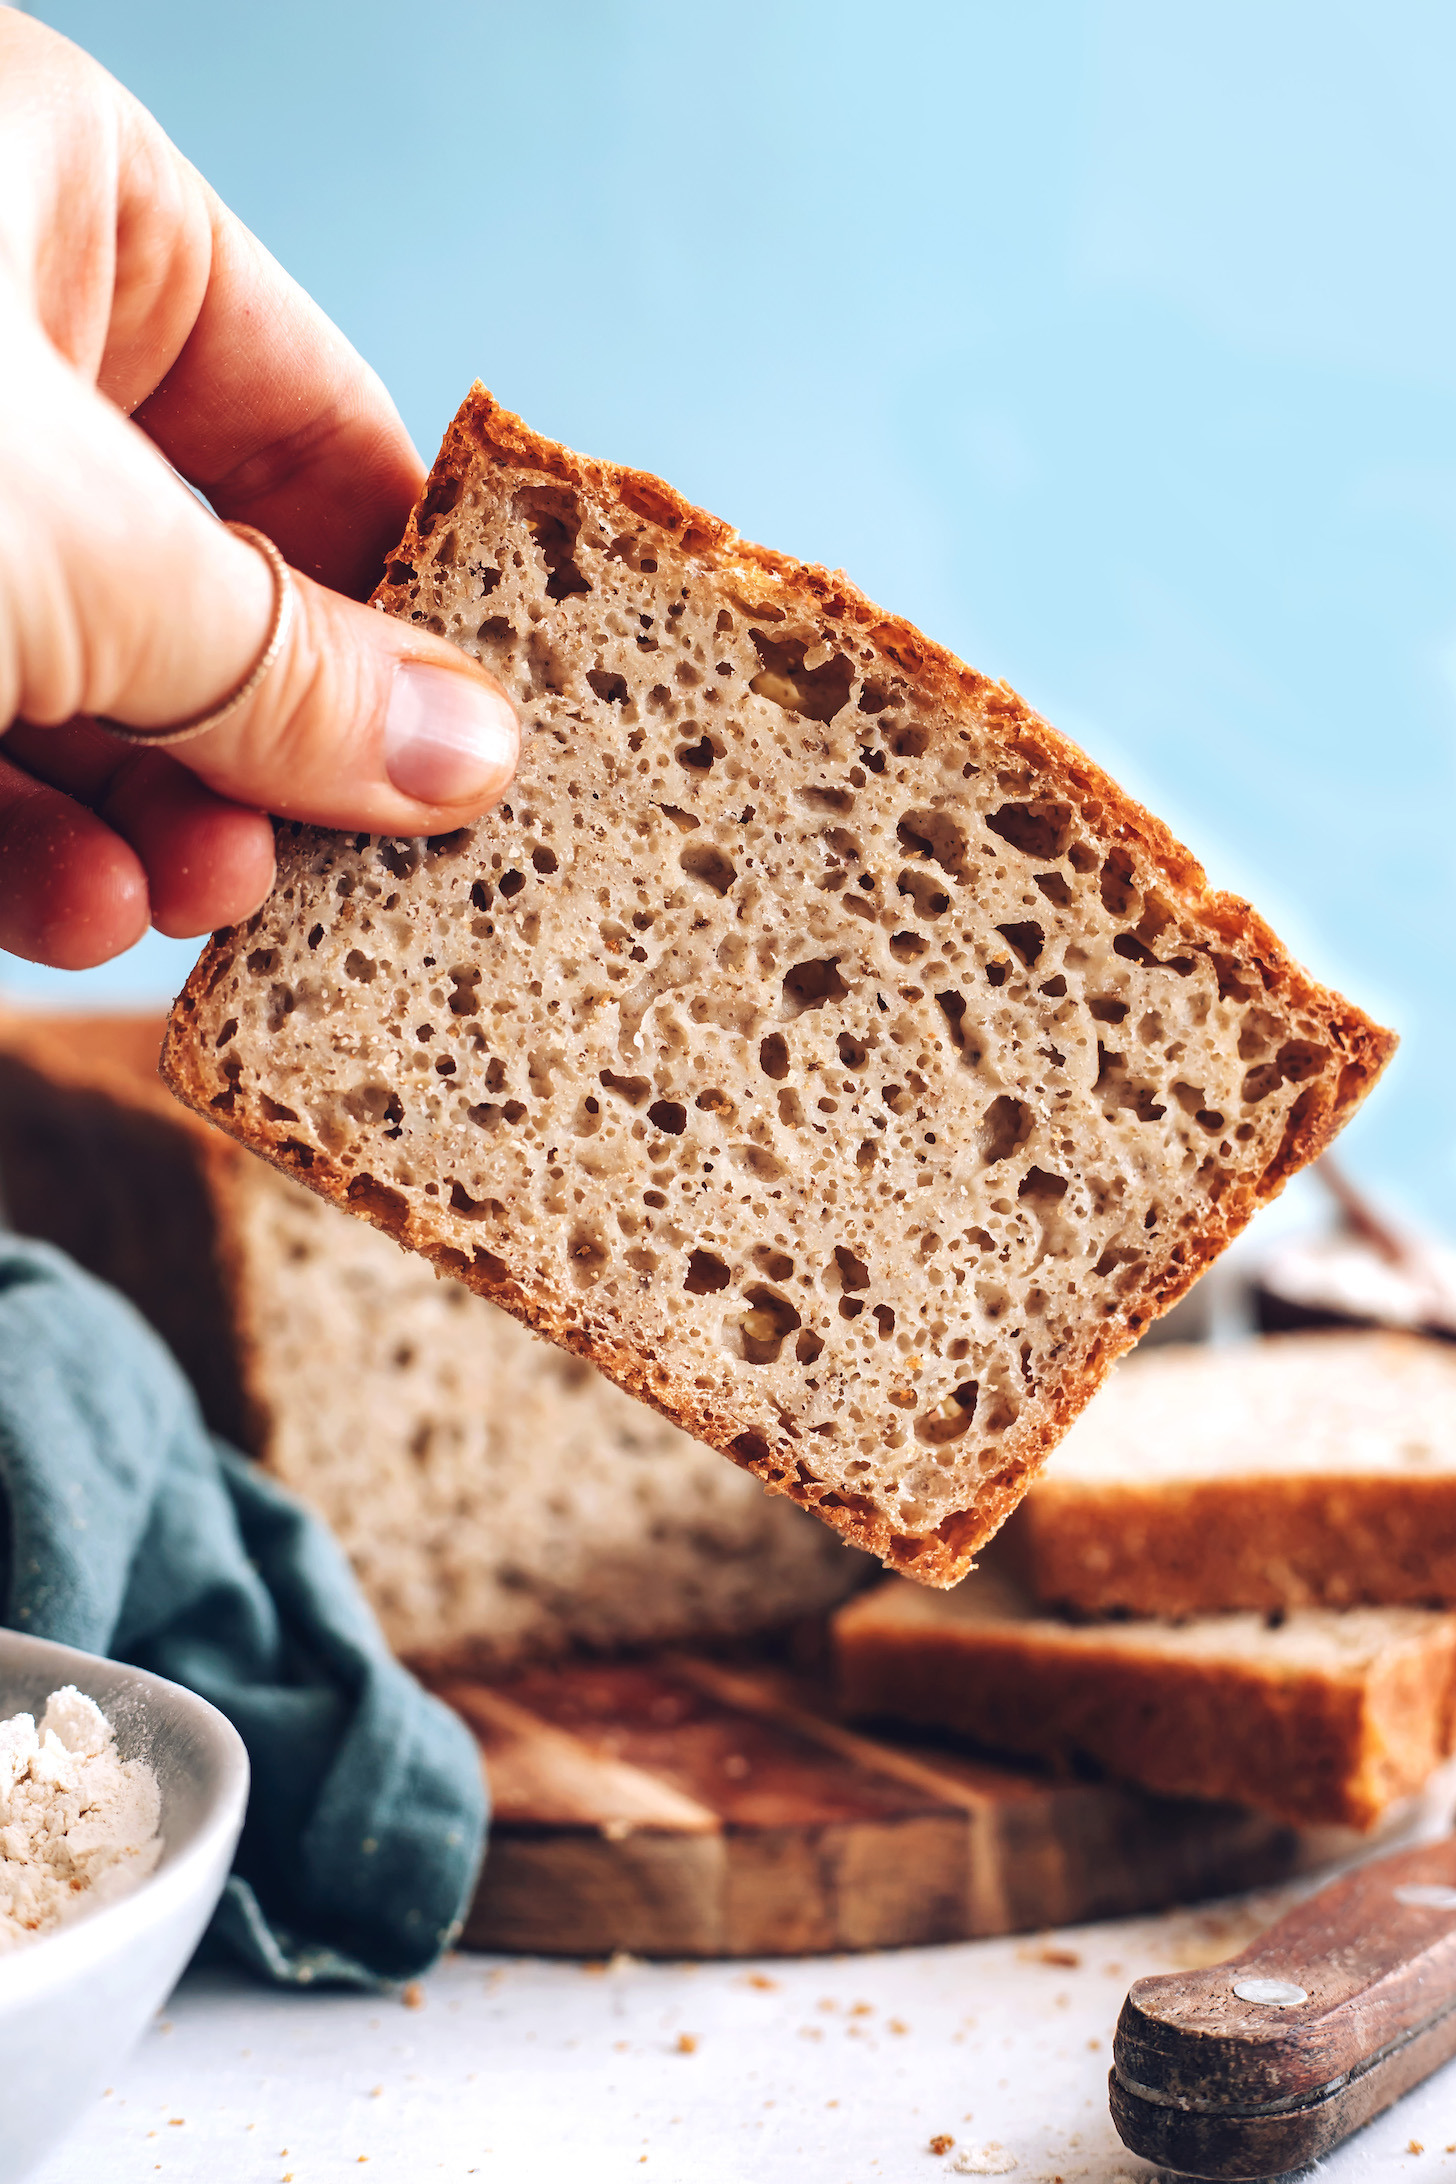 Tips to Slicing and Serving Your Gluten Free Bread